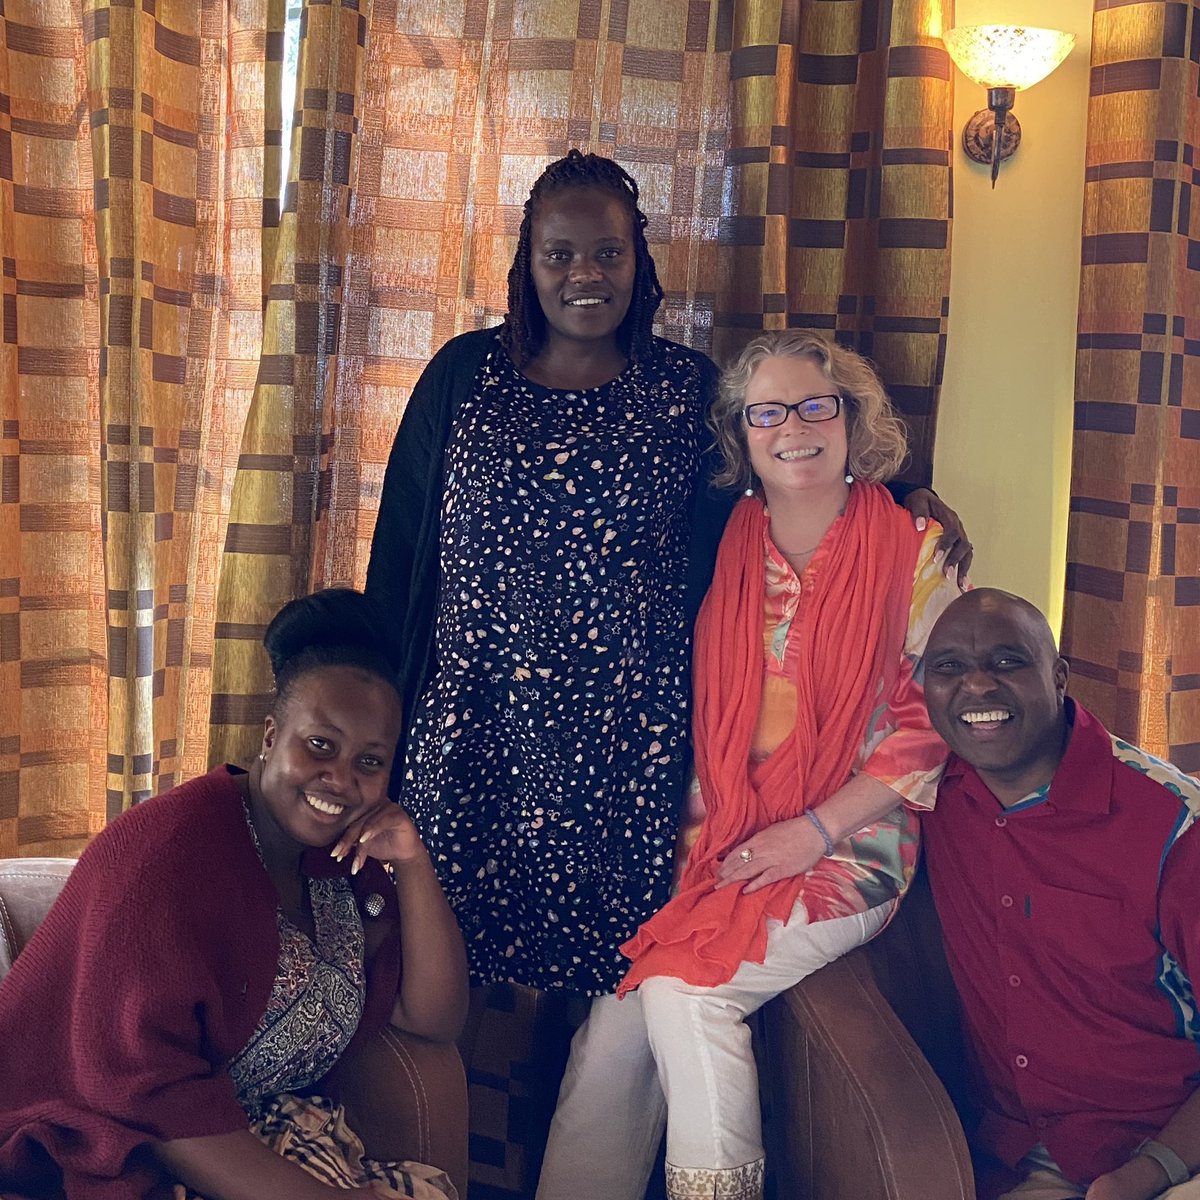 Nairobi: happy team at the end of a long, rich week of workshops for youth wellbeing. Time to head out into the sunshine!!